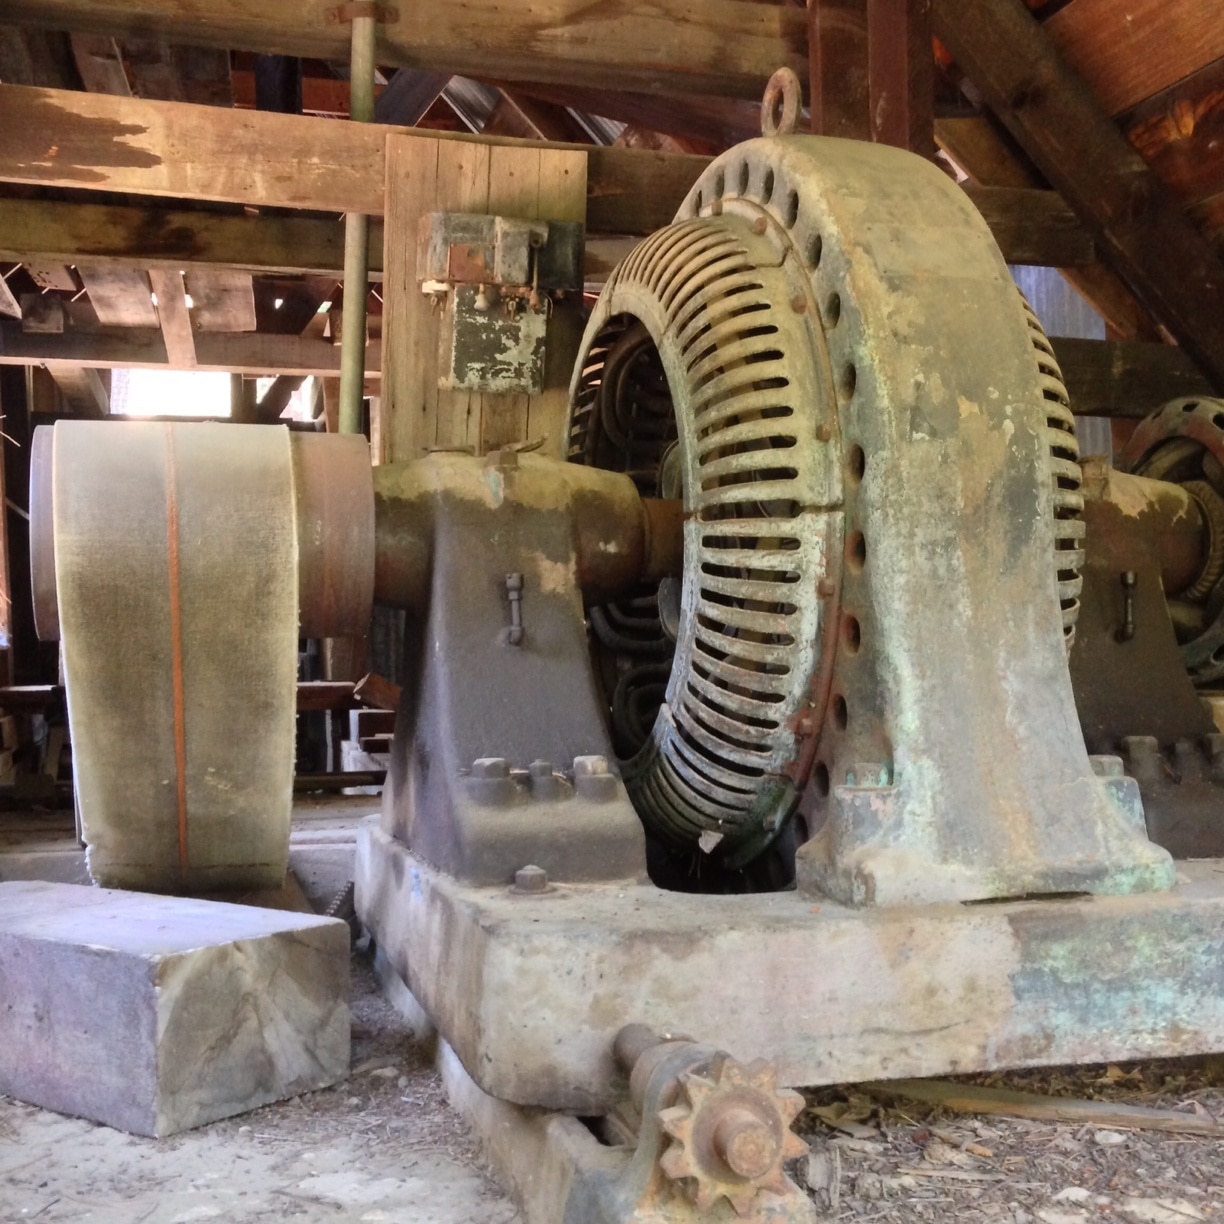 This is a pelton wheel powered generator near the Jamison Mine. #camp